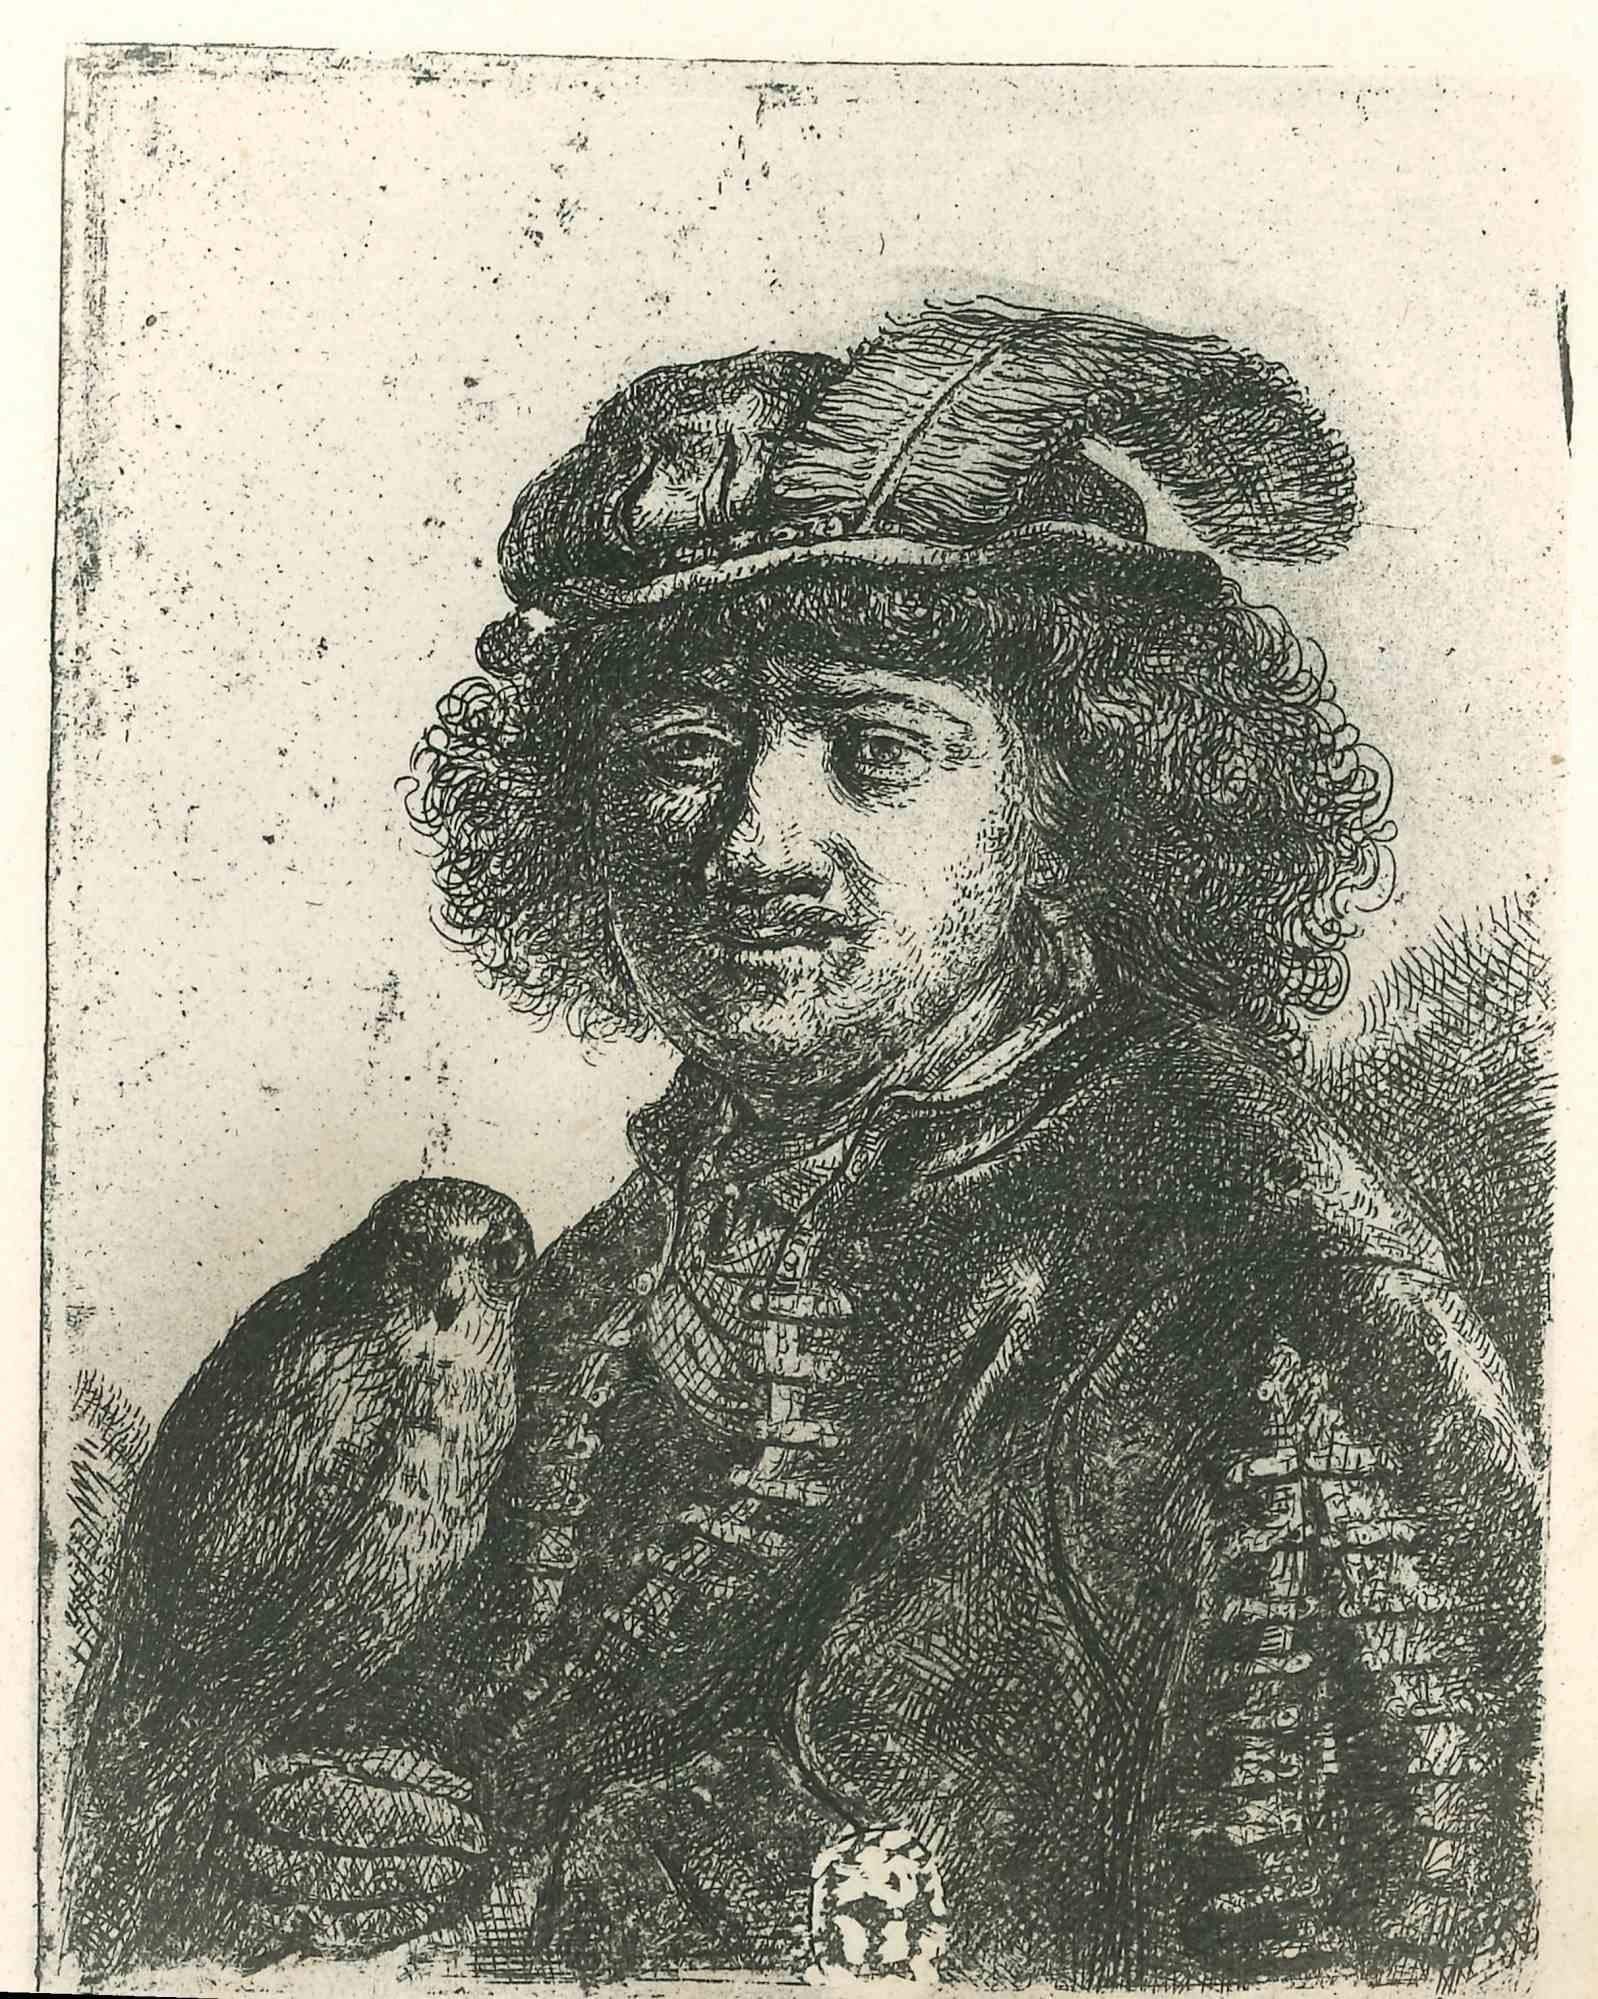 Charles Amand Durand Portrait Print - Man With a Hawk - Engraving after Rembrandt - 19th Century